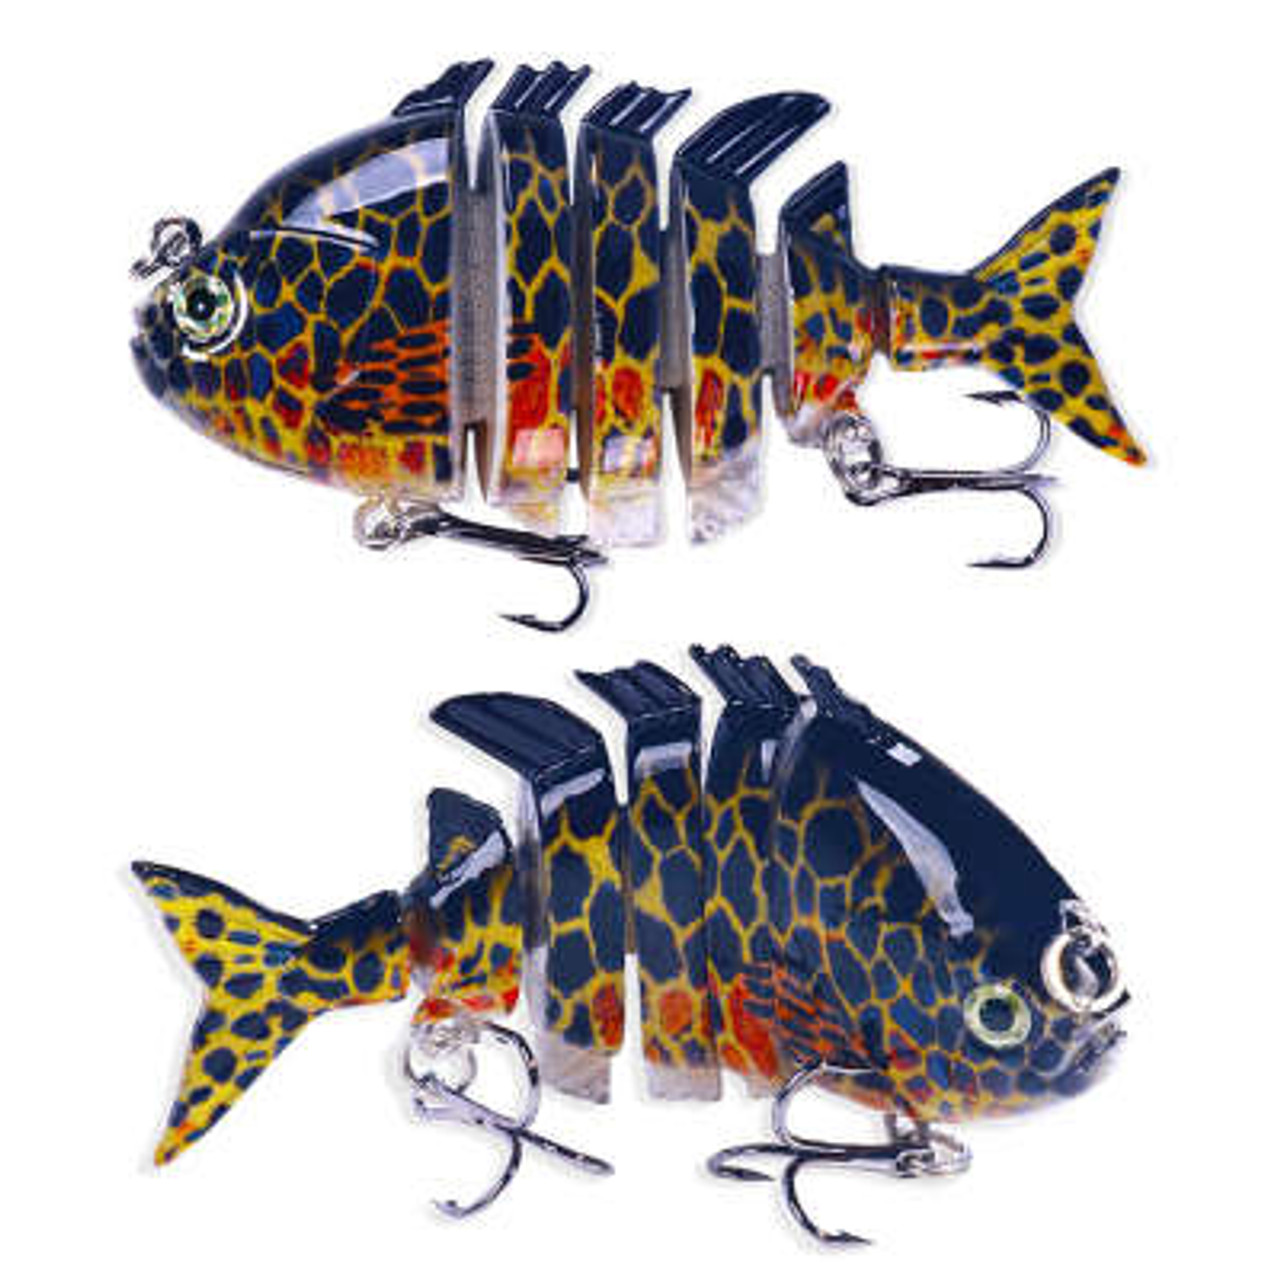 3 Pack! 3.12 Bluegill Swimbaits 6 segments. 3 colors. 3 lures in its own  Tackle Box.